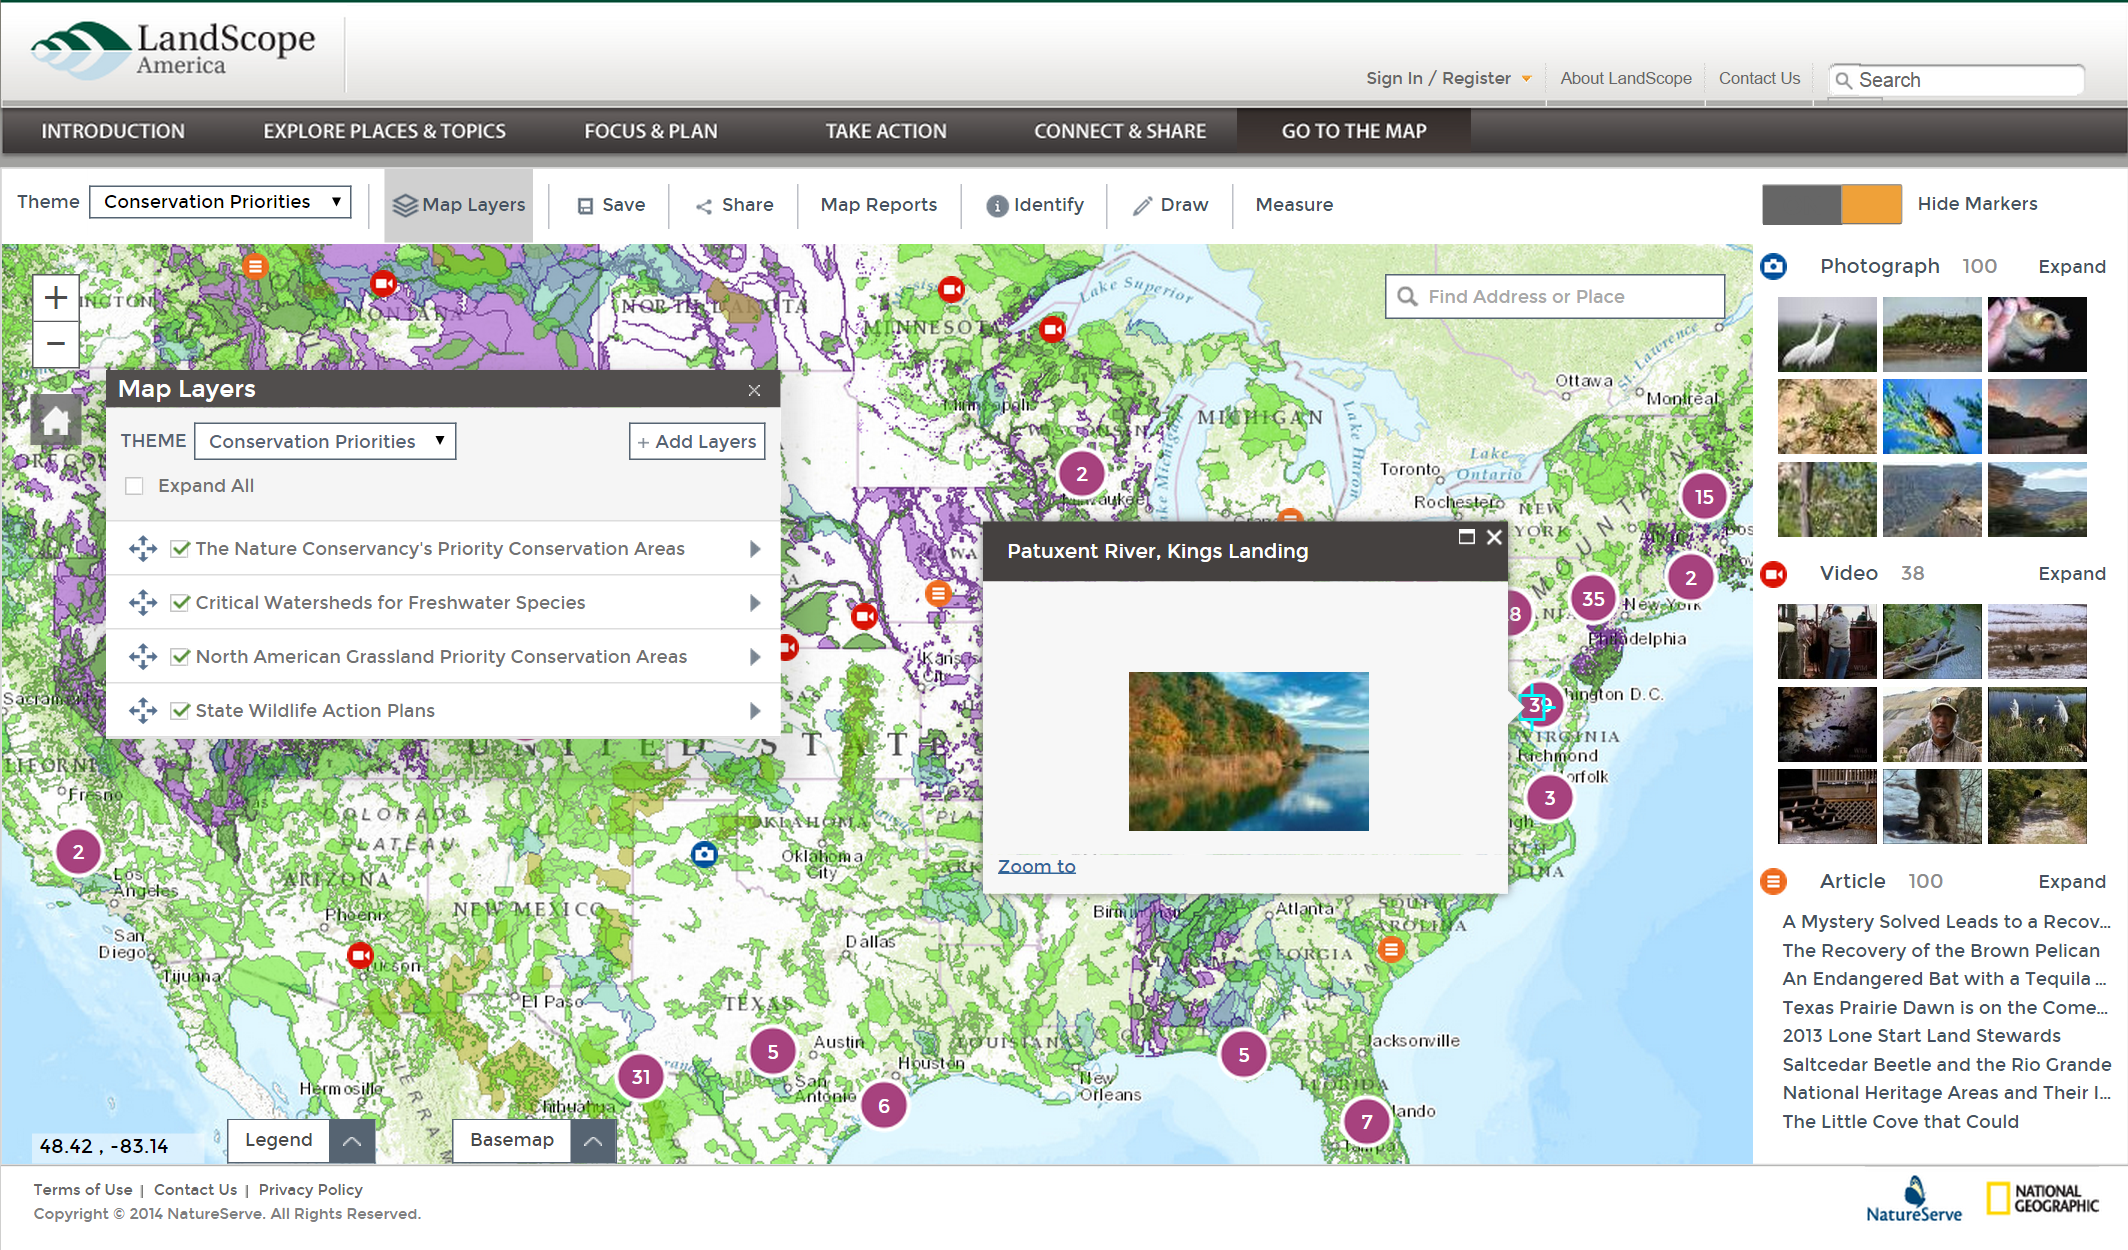 A modernized and more intuitive map viewer highlights the latest upgrades to LandScope America.